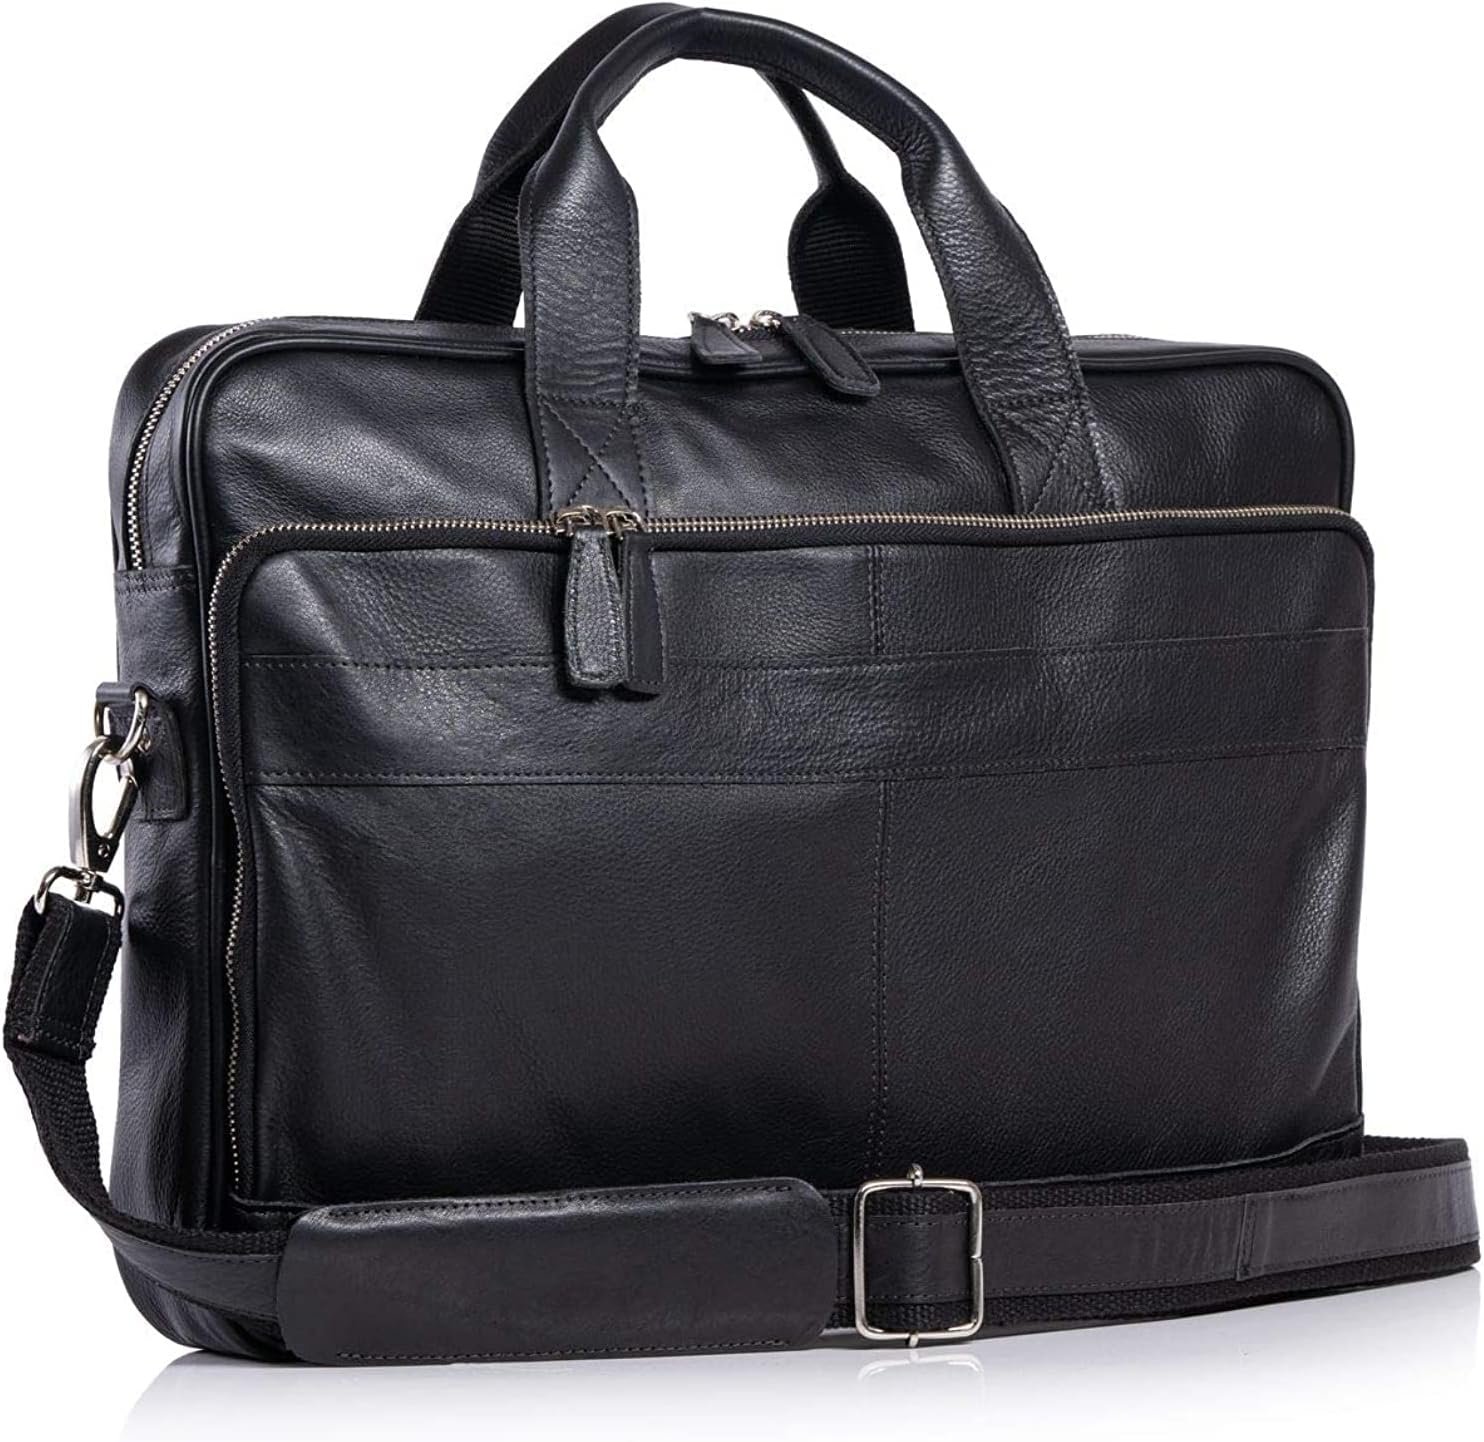 Leather briefcase 18 Inch Laptop Messenger Bags Review